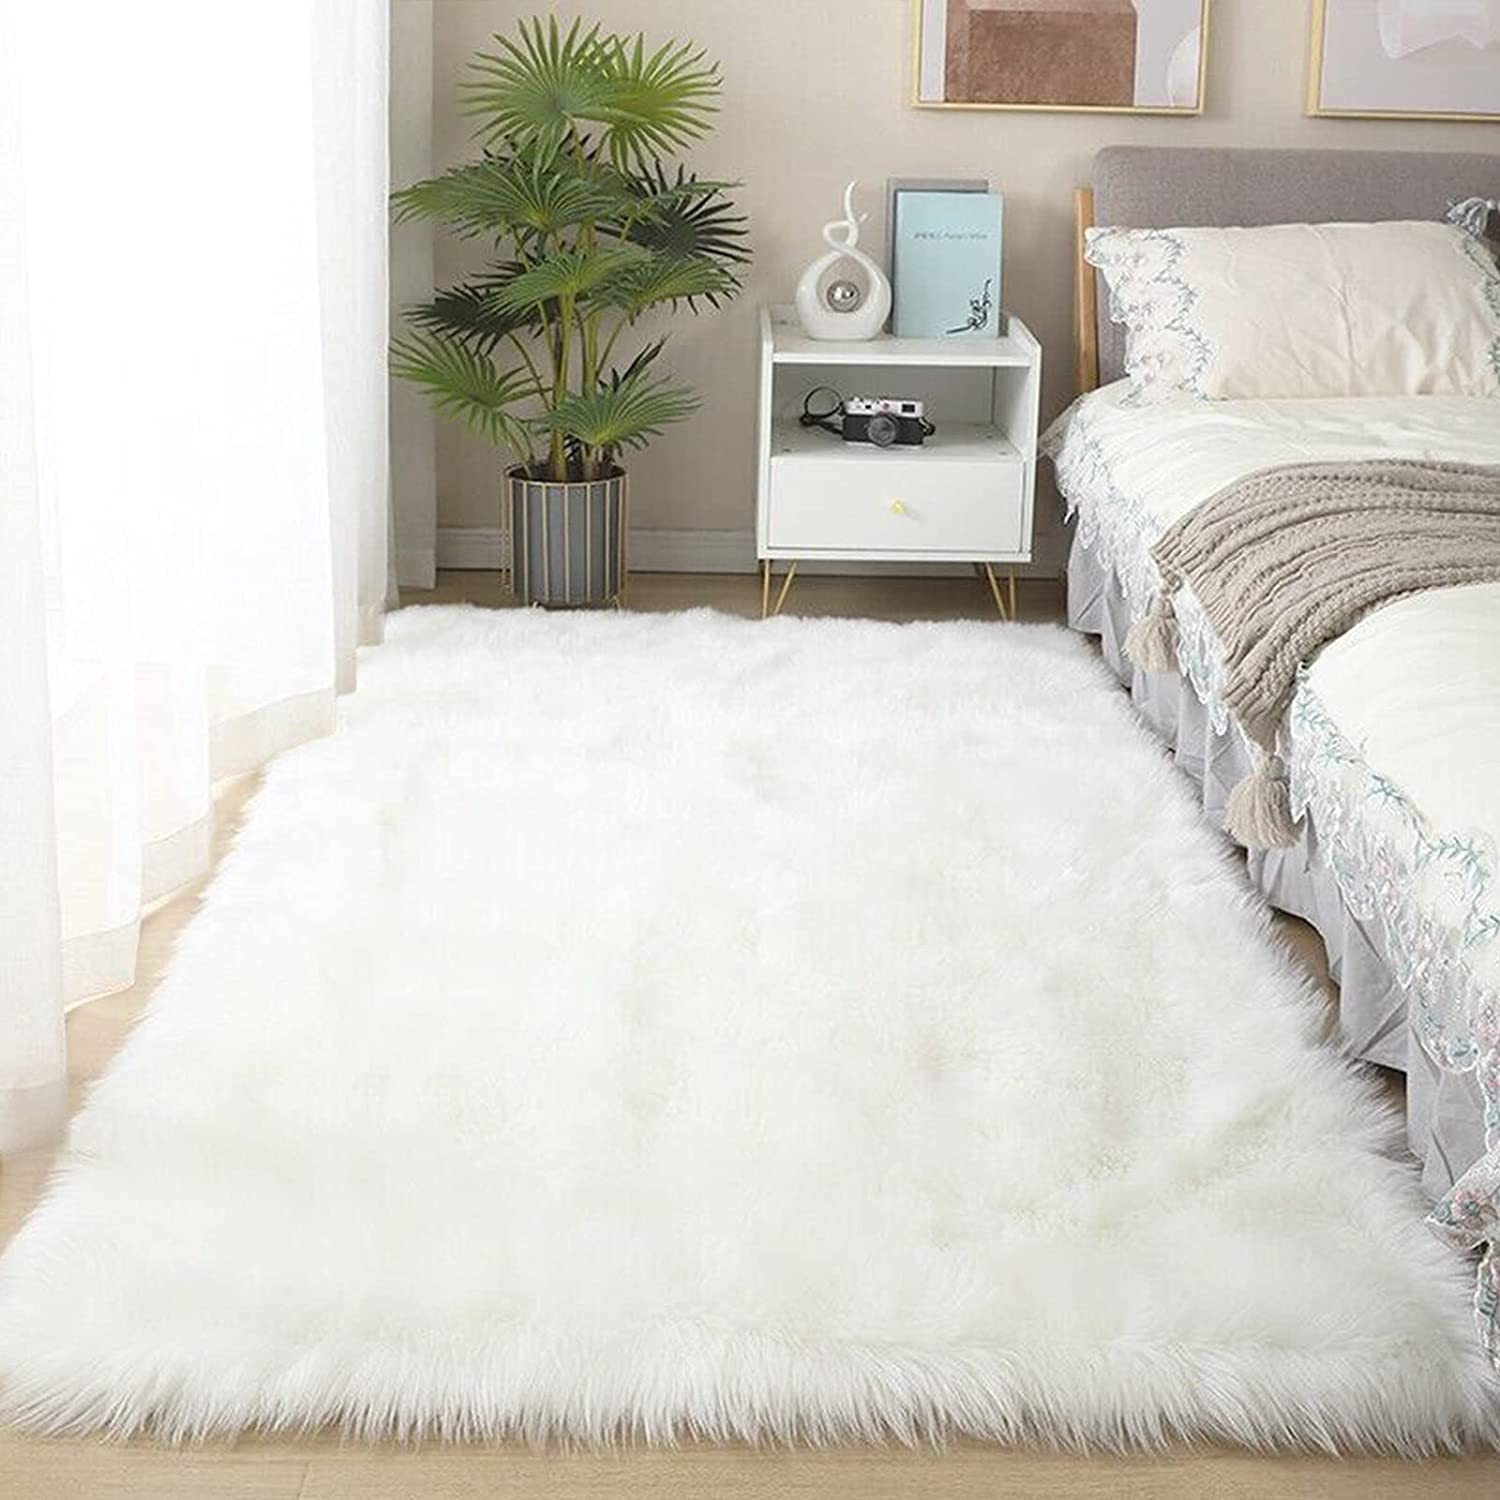 HOMBYS 5x8 Oversized Faux Fur Area Rug